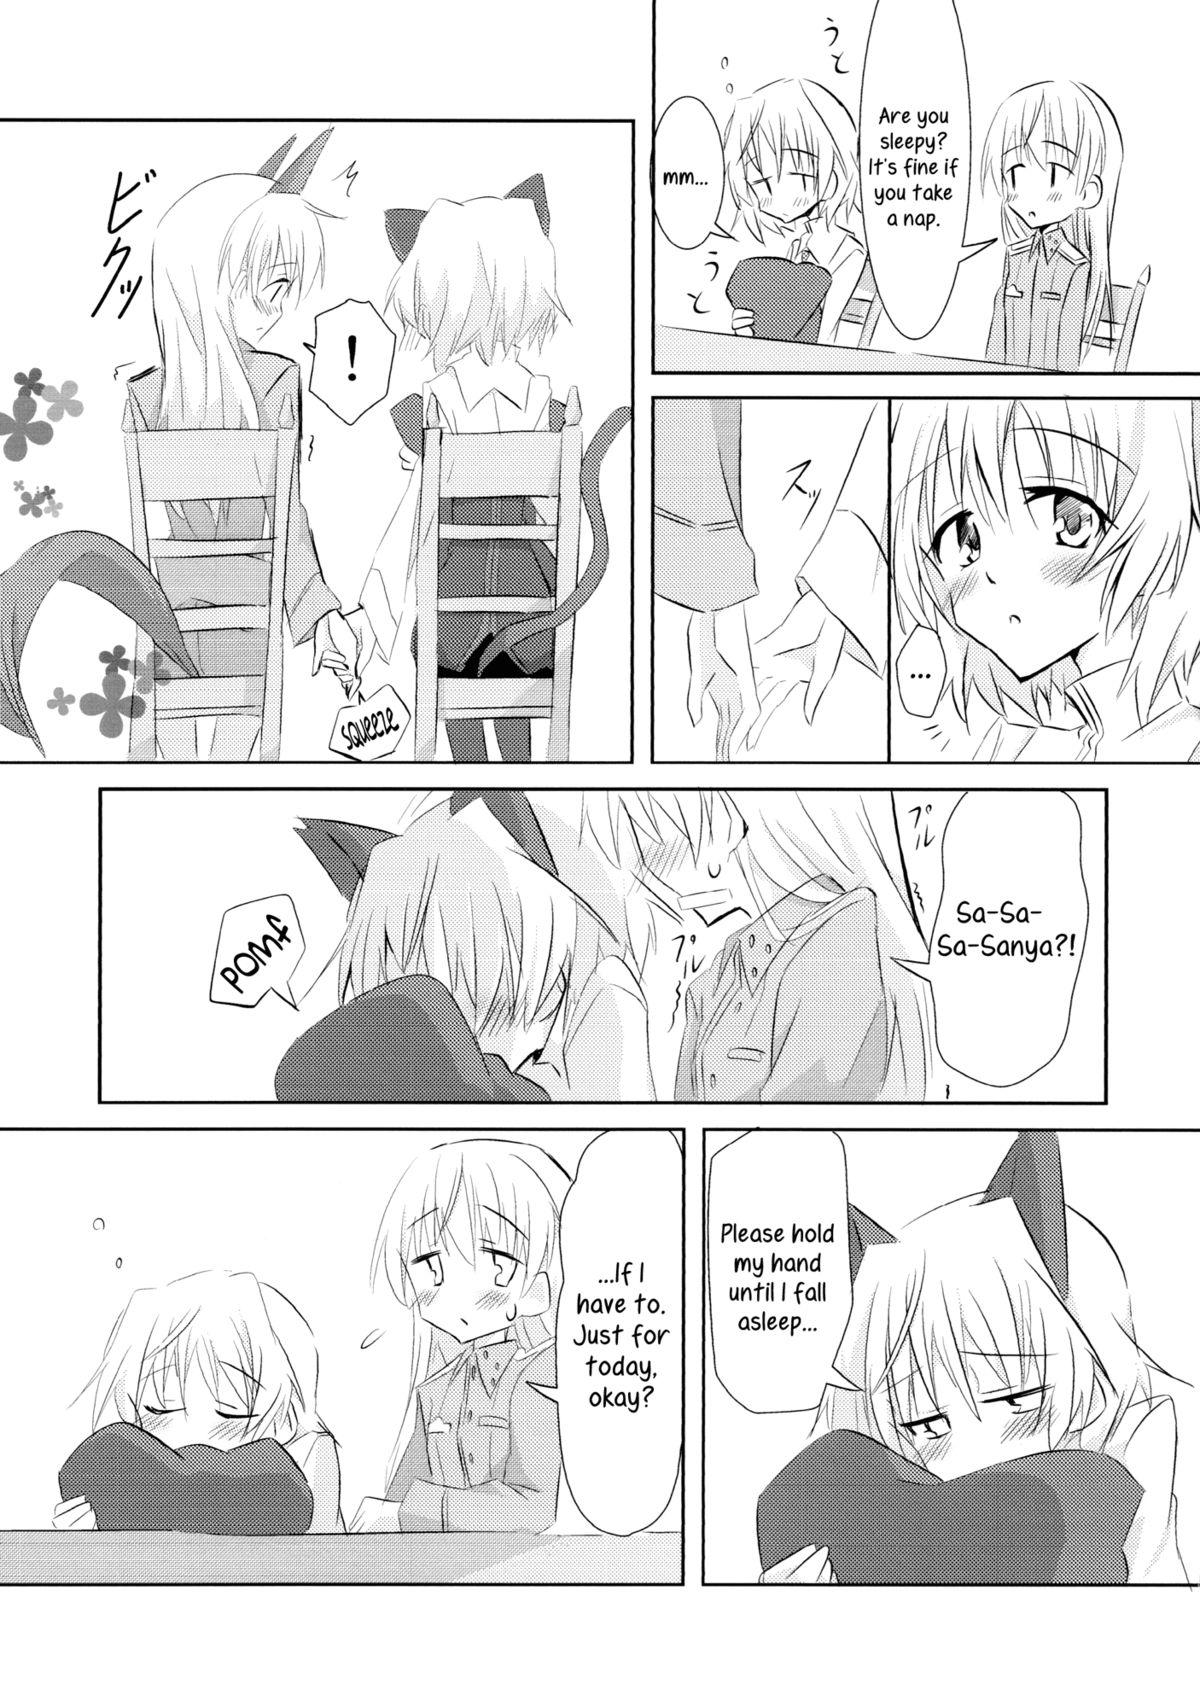 Prostitute EilaNyaX - Strike witches Alone - Page 4